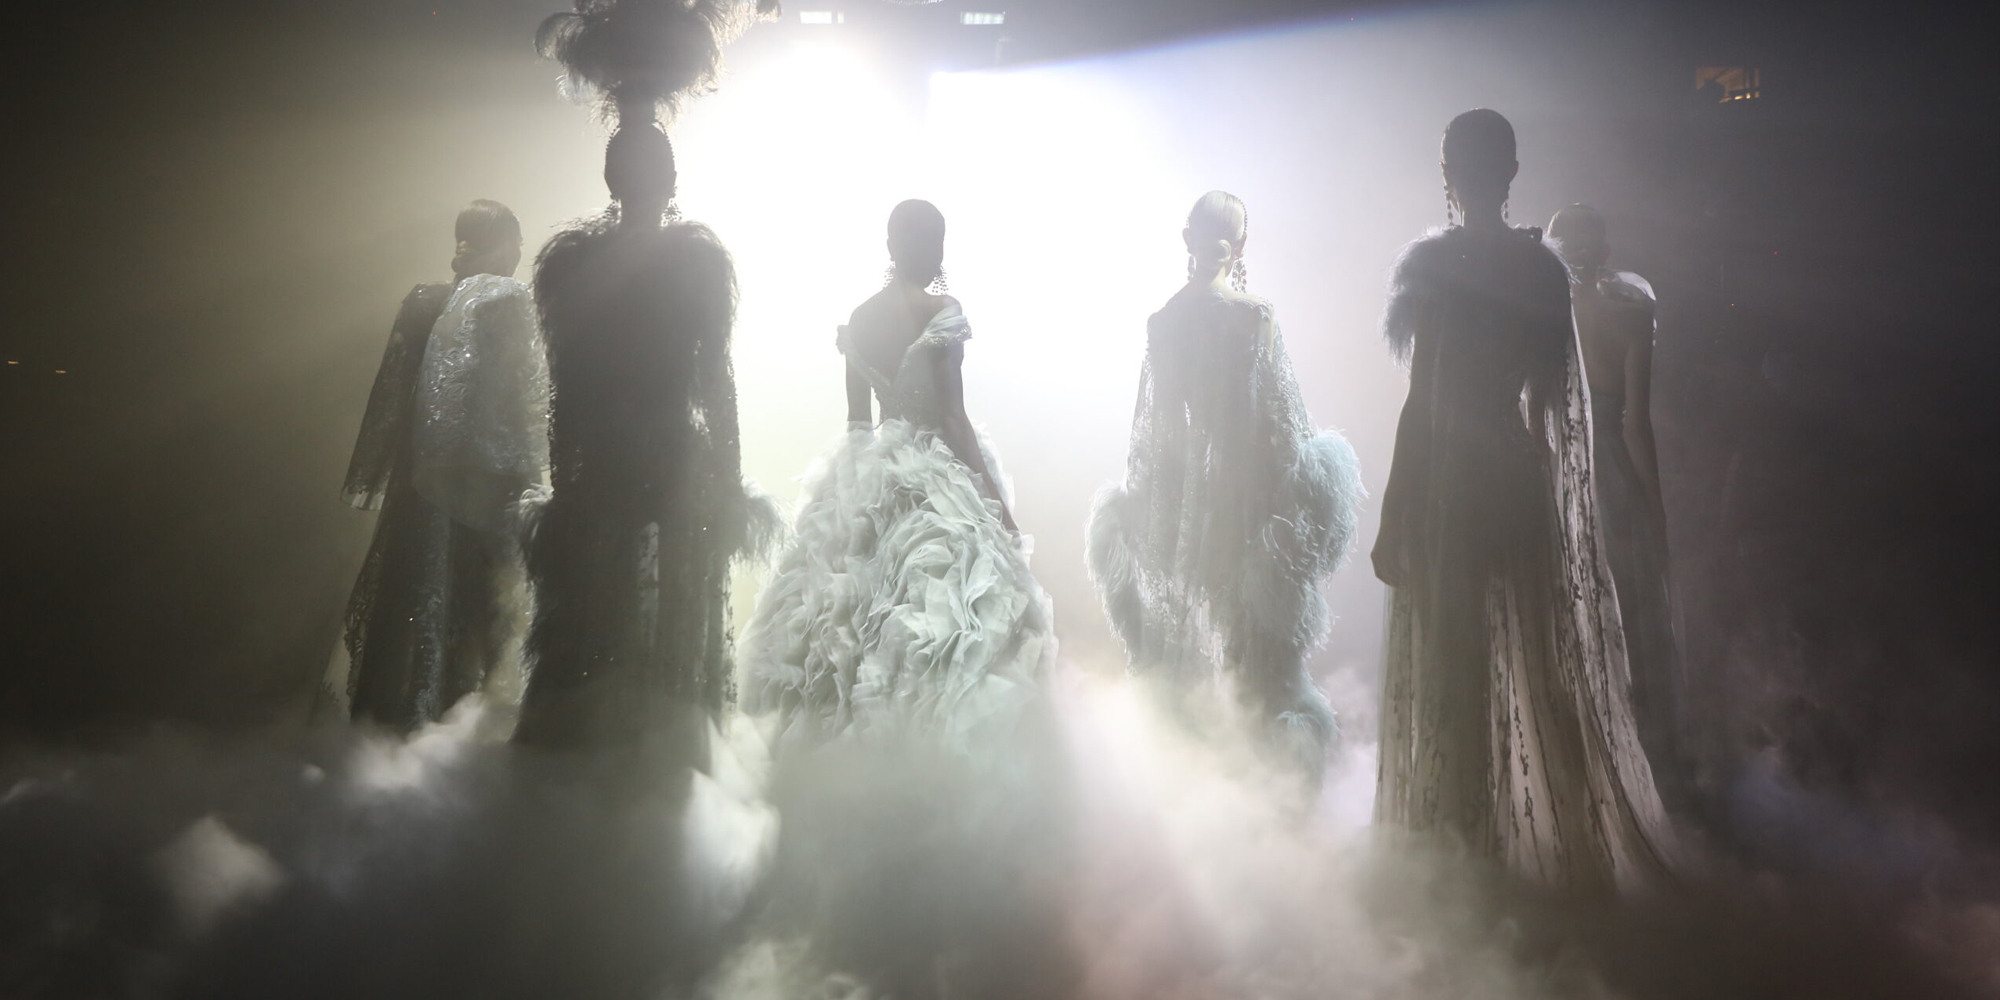 WATCH THE ELIE SAAB SPRING 2022 HAUTE COUTURE RUNWAY SHOW LIVE